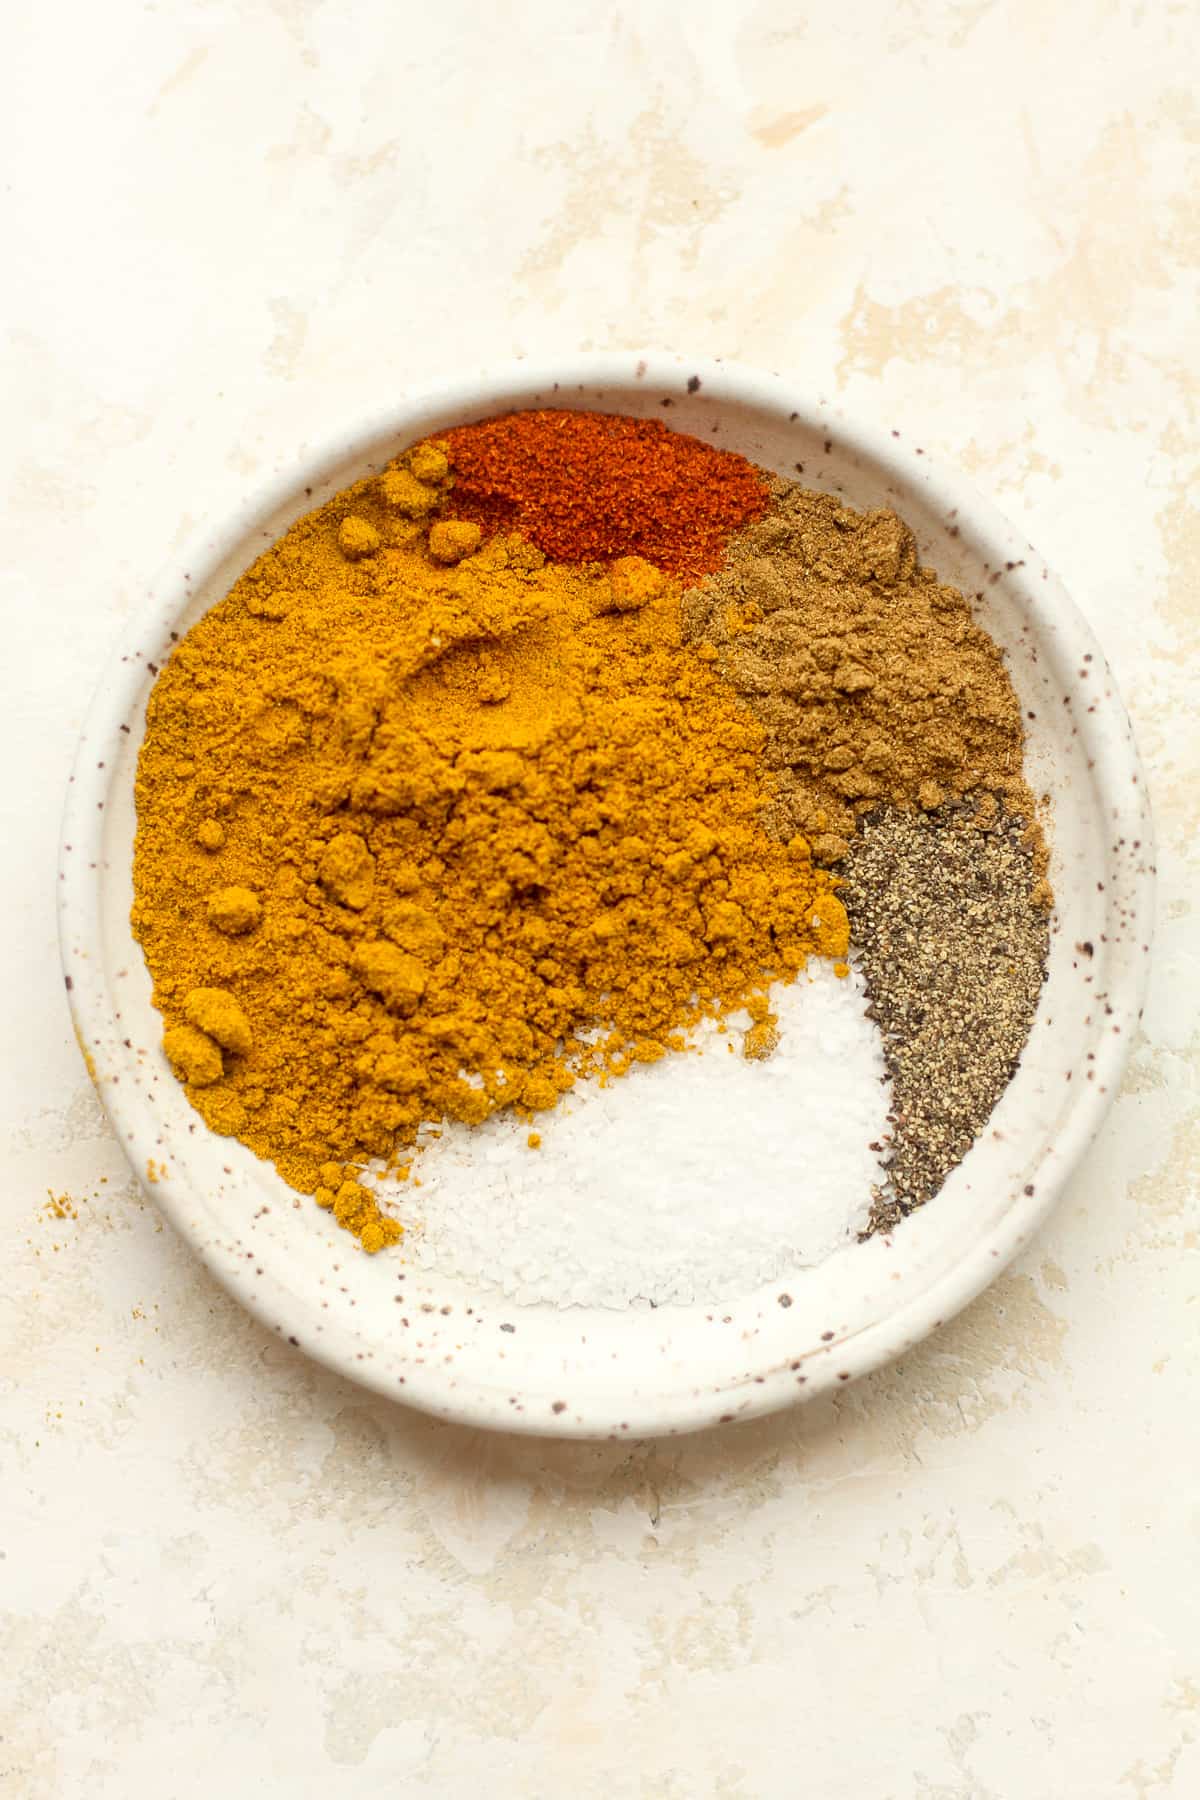 A plate of the seasonings - curry, cumin, cayenne, salt, and pepper.